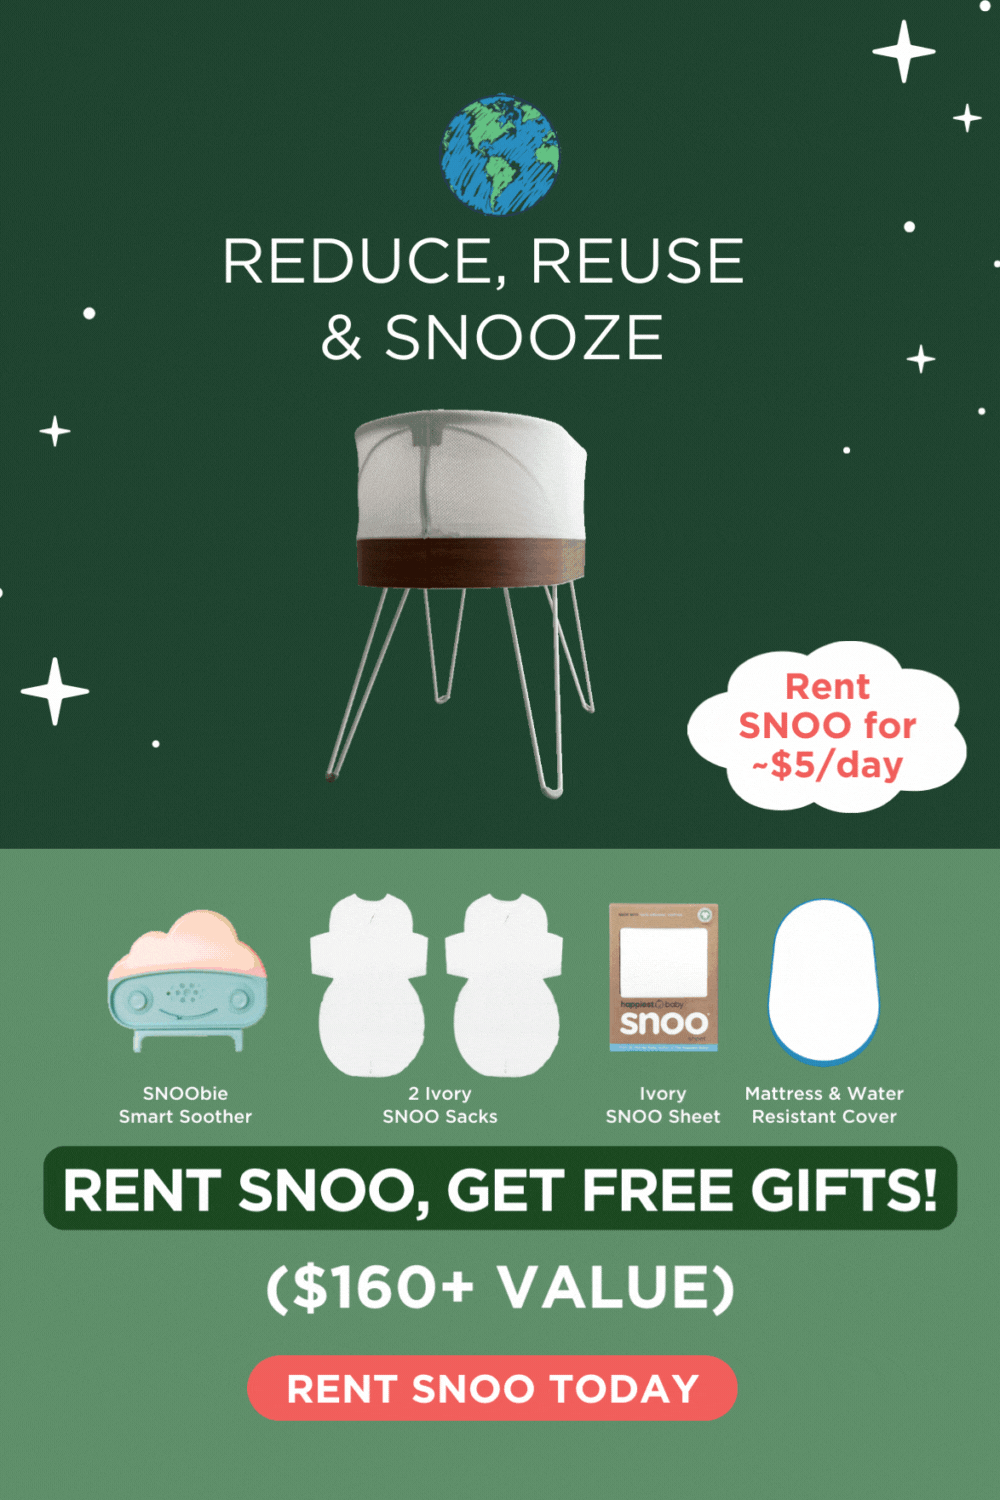 Happy Earth Month! Reduce, Reuse & SNOOze. Rent SNOO for ~\\$5/day. Rent SNOO, Get Free Gifts! (\\$160+ Value). Rent SNOO Today